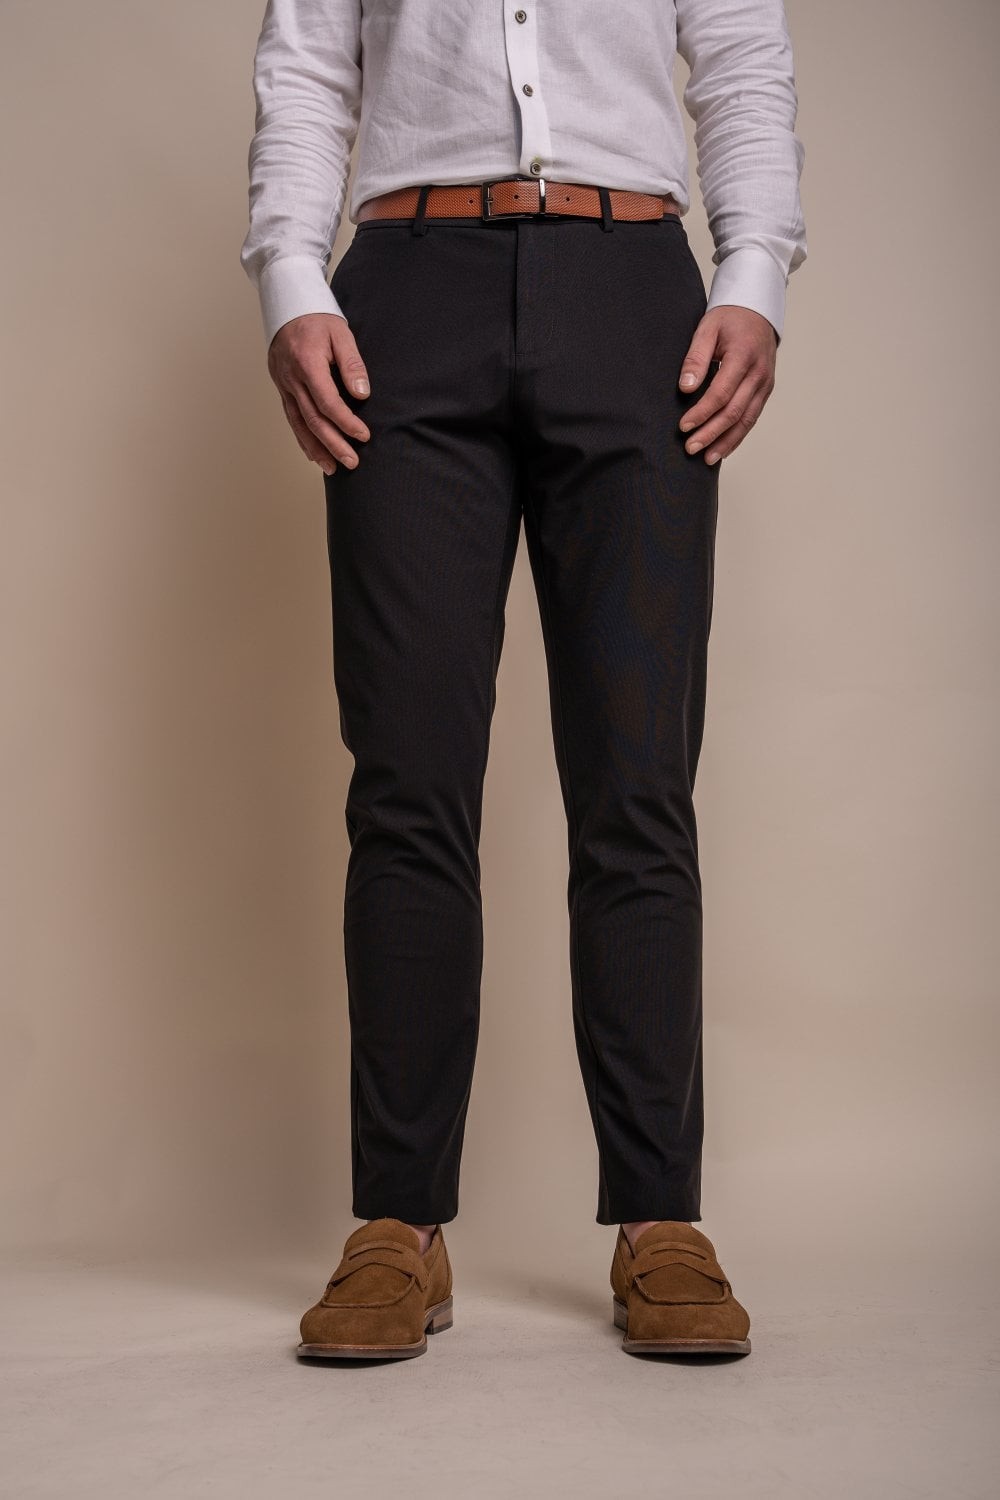 Men's Slim Fit Casual Trousers - REED